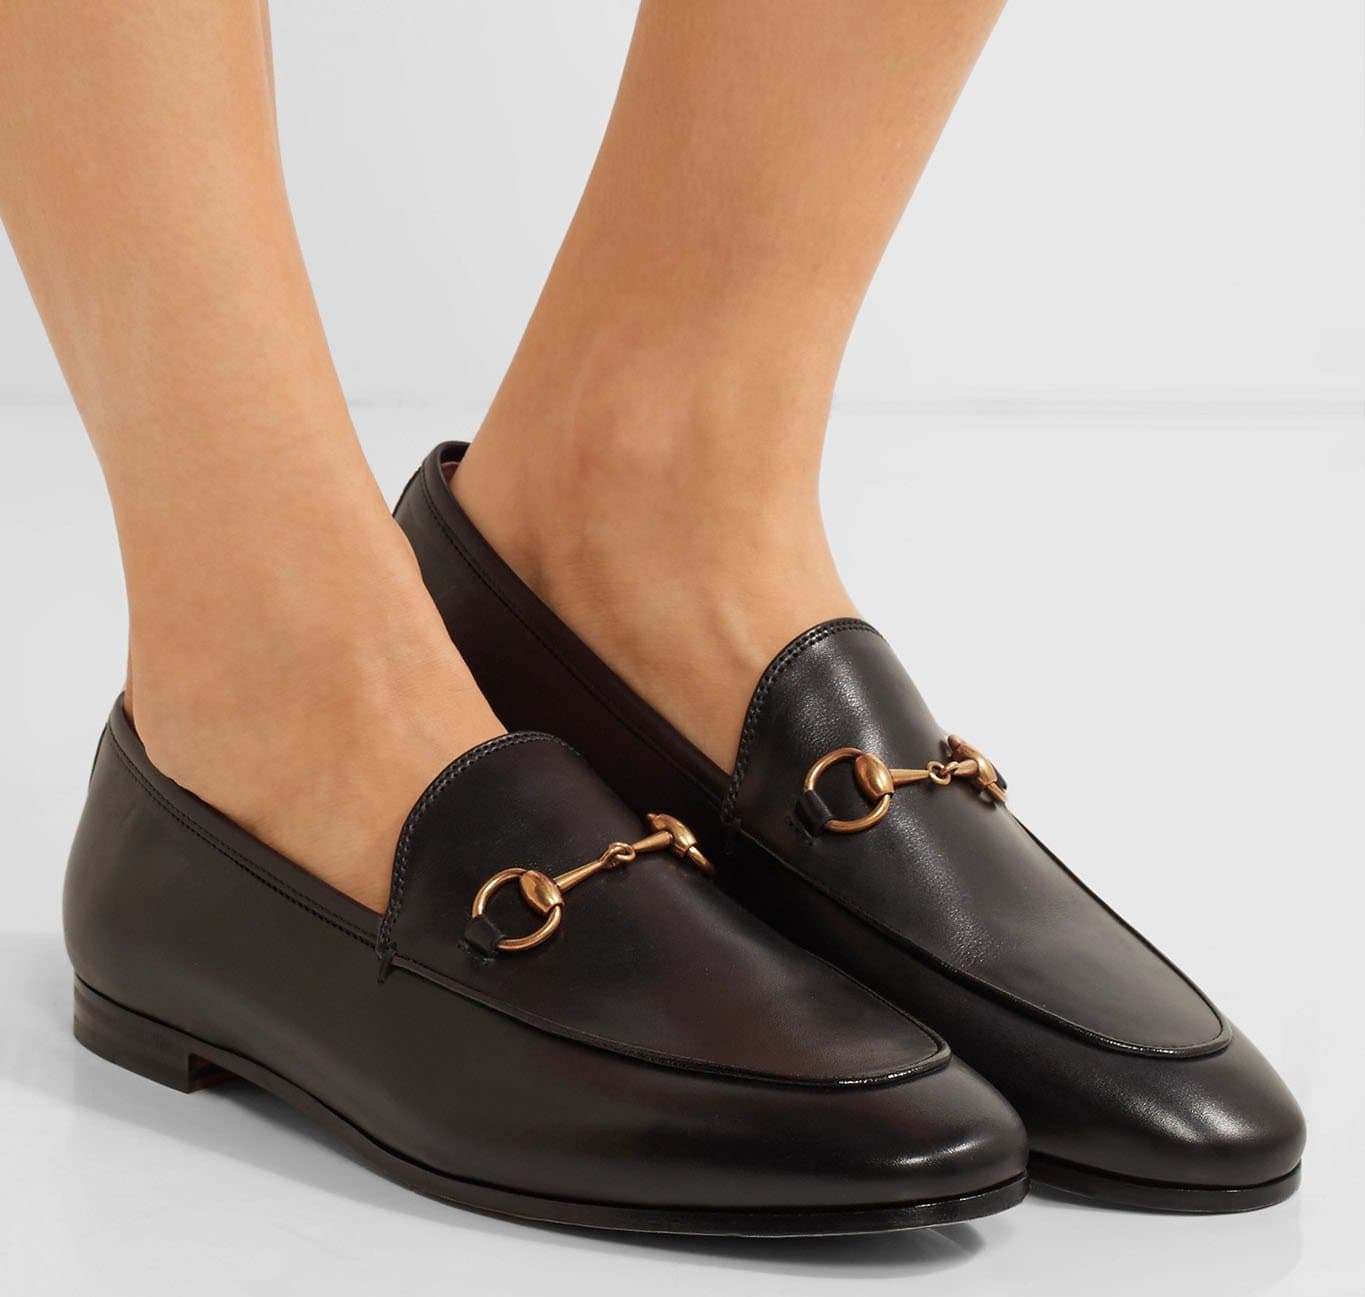 Gucci's classic loafers have the fashion house's signature gold horsebit hardware